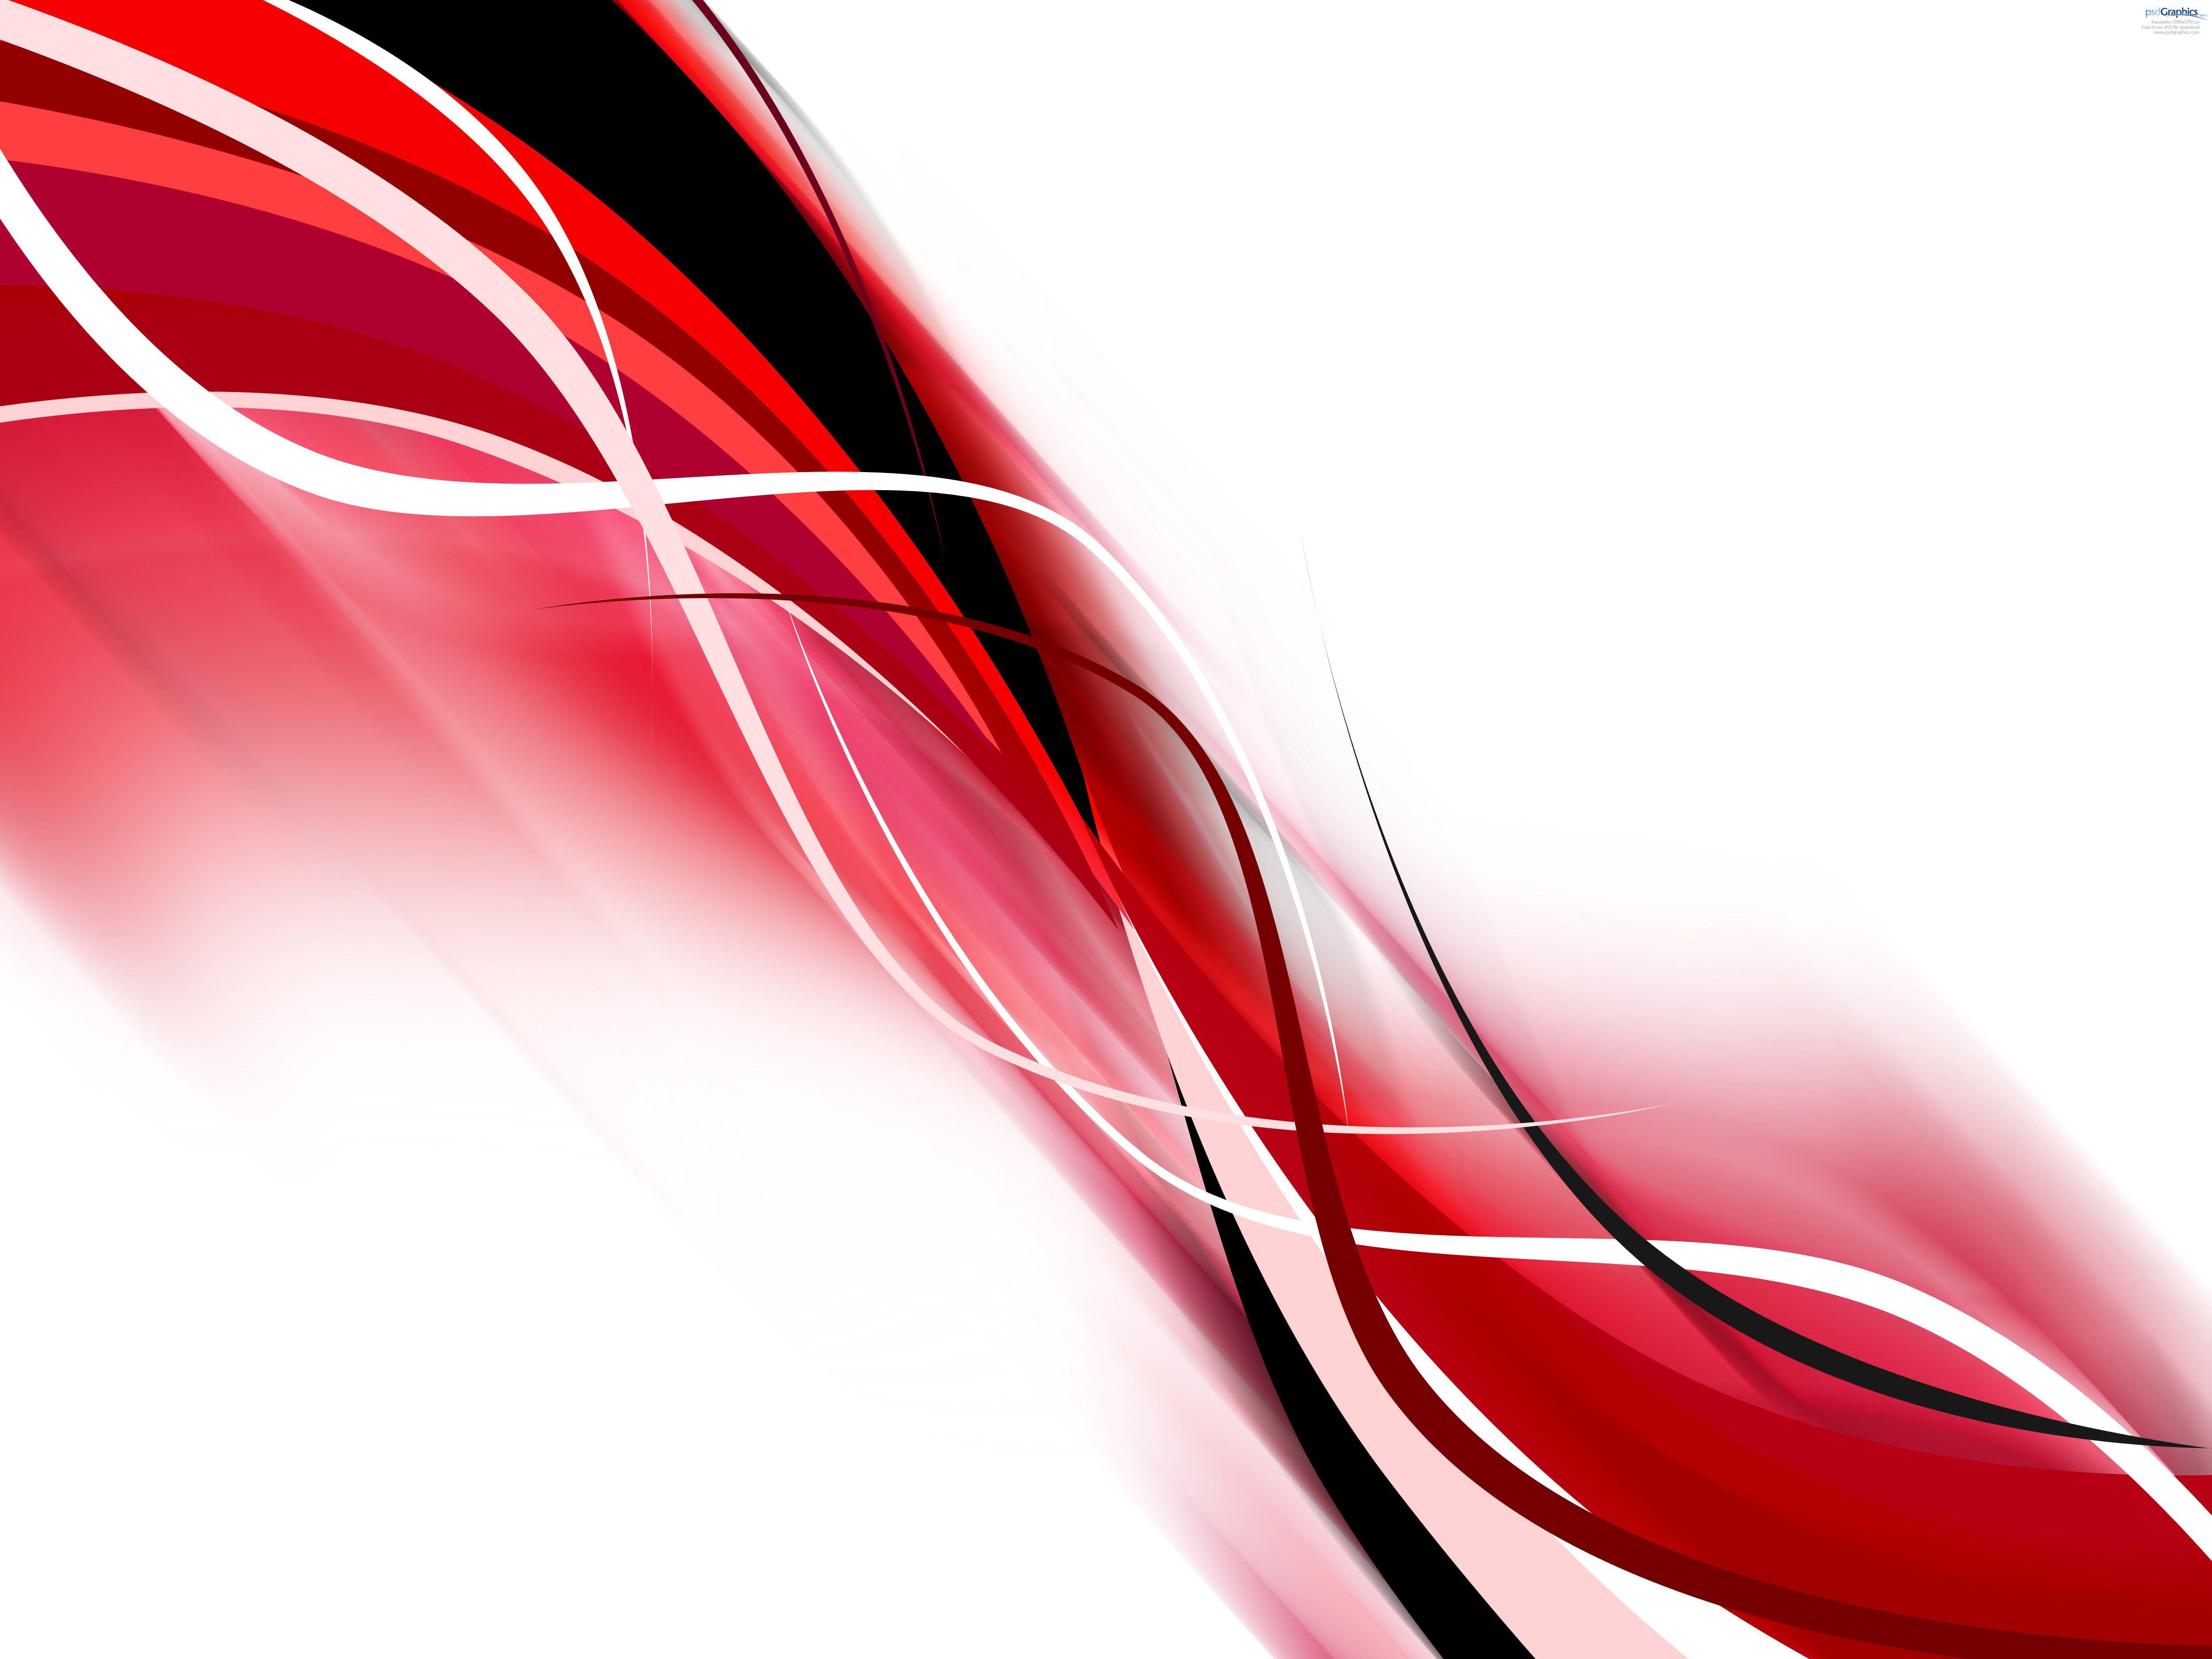 Abstract Art Black And White Red HD Wallpaper, Background Image